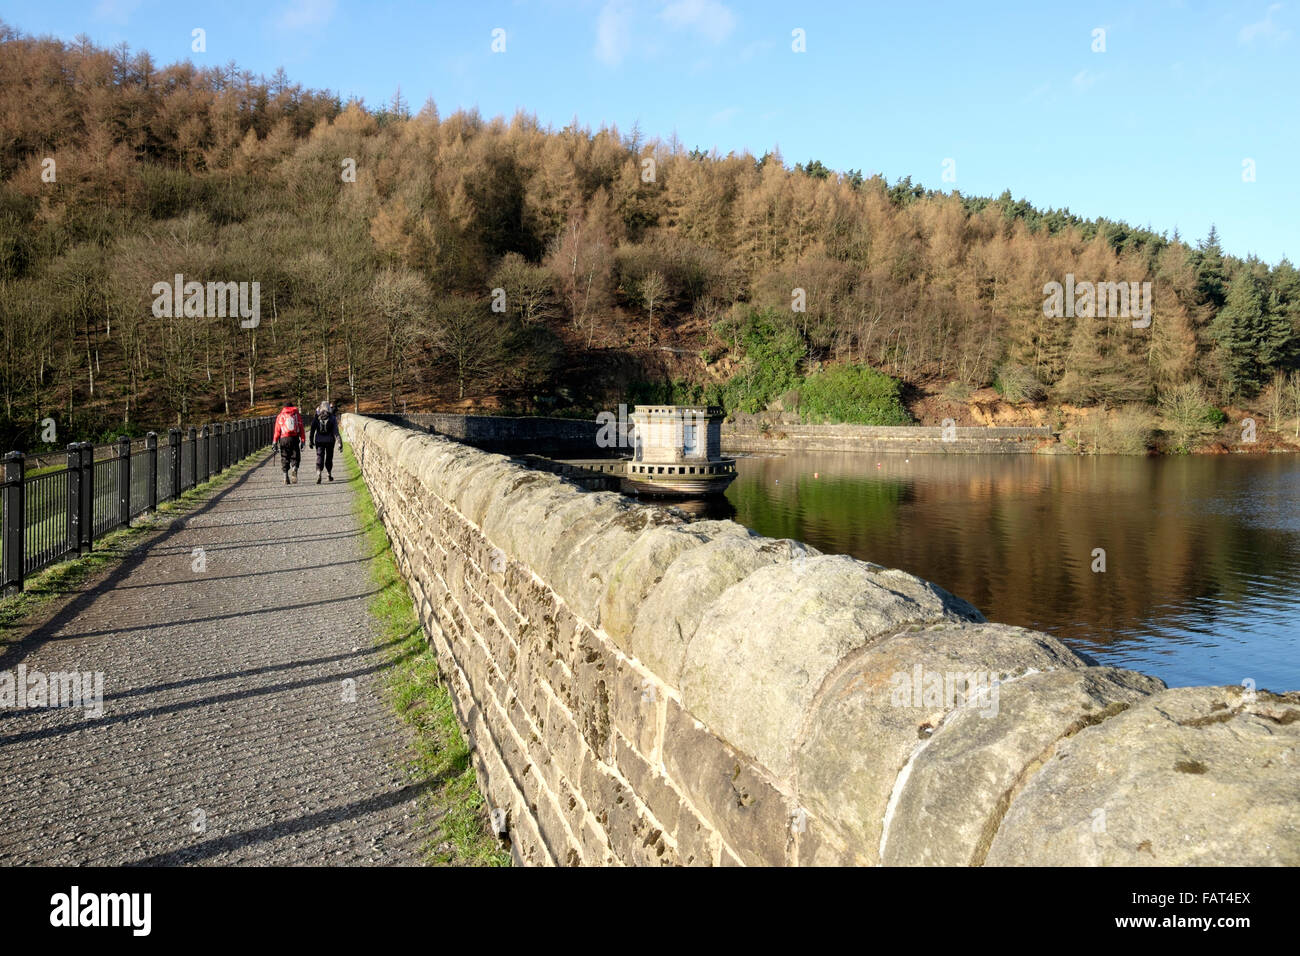 Two people walk along the dam wall of the Ladybower reservoir, Upper Derwent Valley, Derbyshire, England, UK Stock Photo